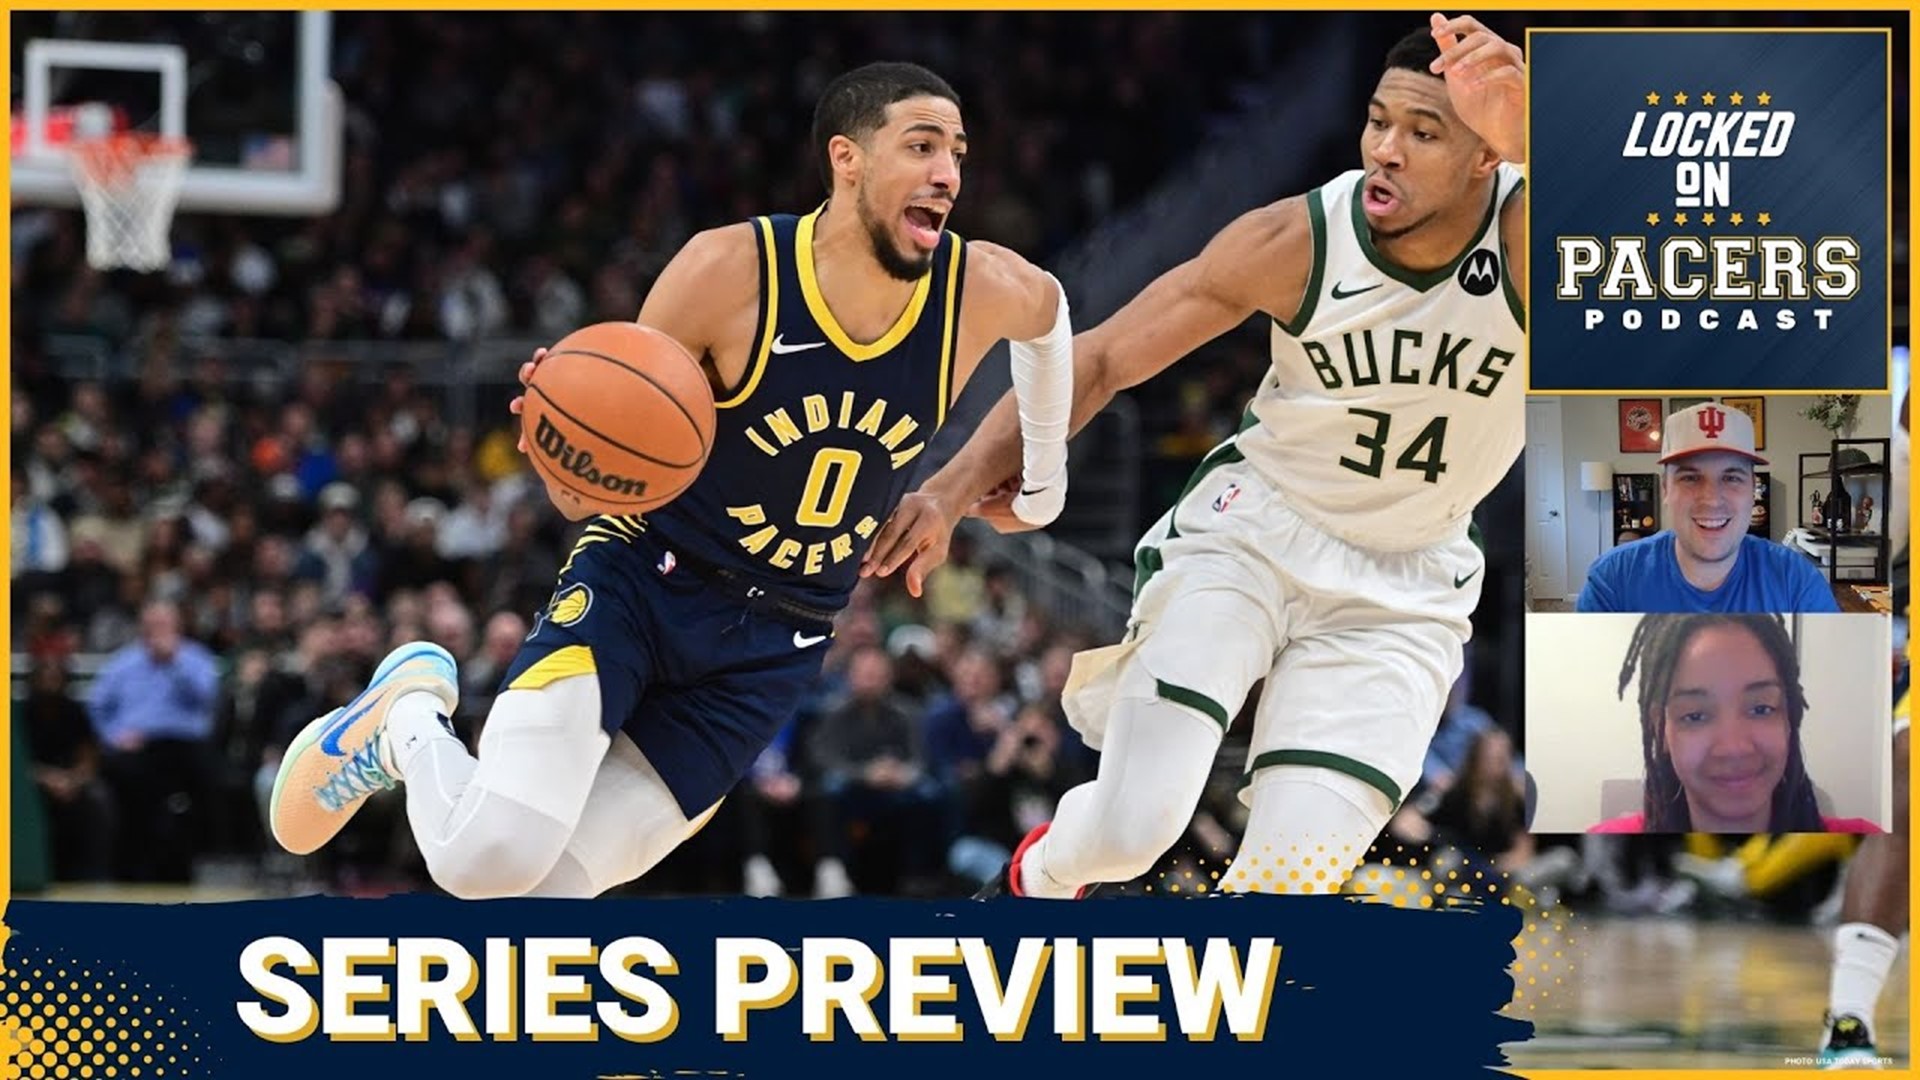 Indiana Pacers vs Milwaukee Bucks preview. Big questions, key players, and series predictions